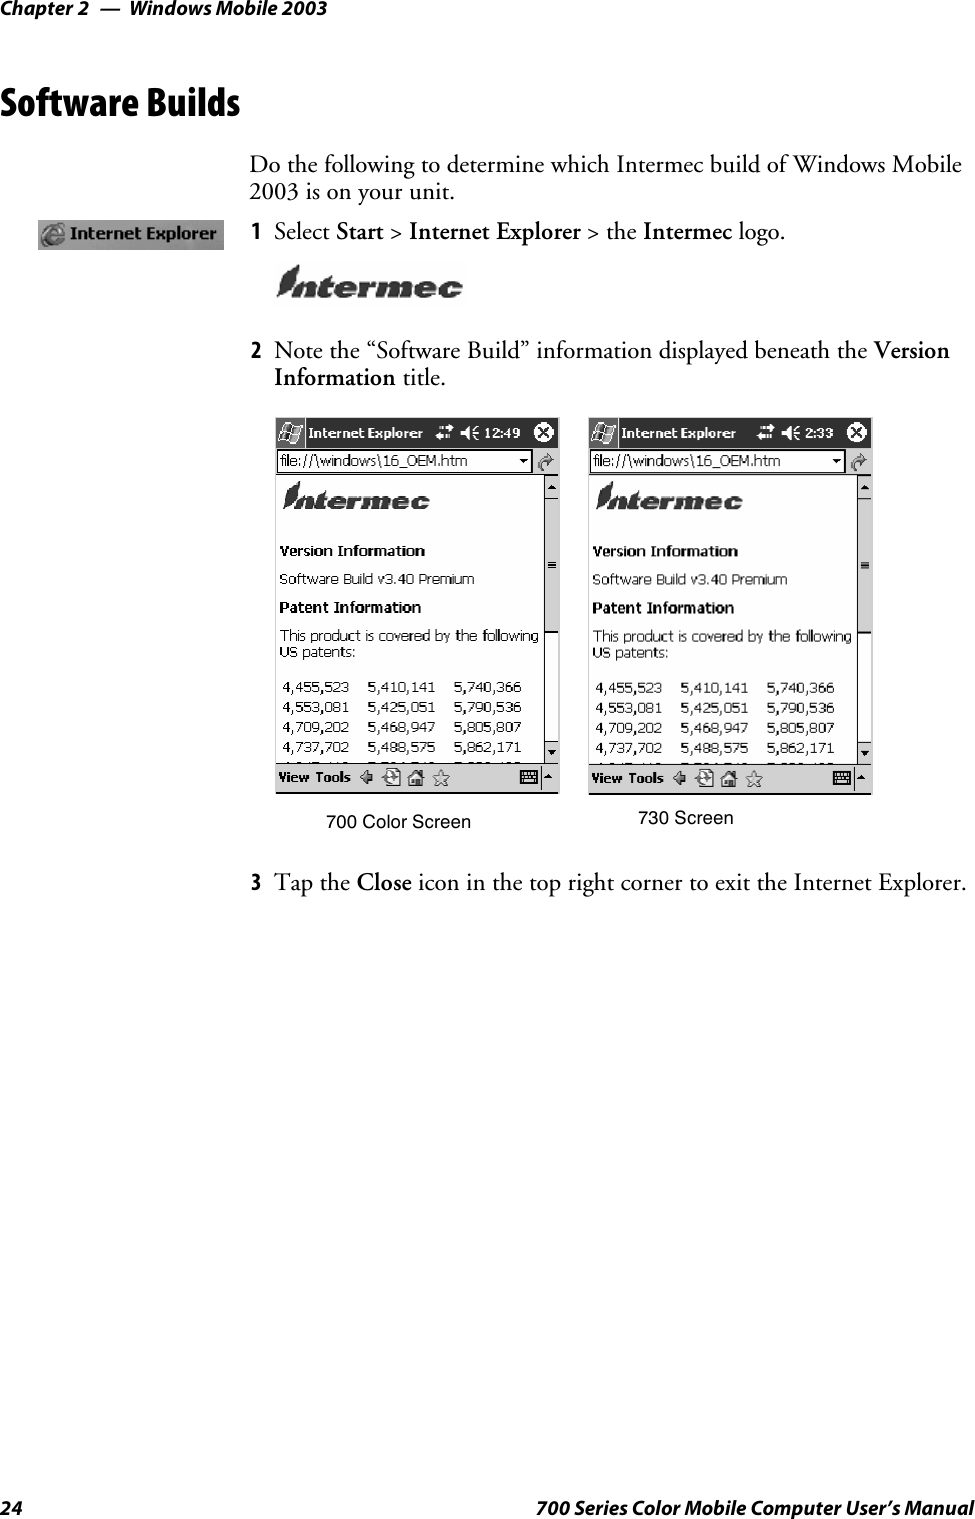 Windows Mobile 2003Chapter —224 700 Series Color Mobile Computer User’s ManualSoftware BuildsDo the following to determine which Intermec build of Windows Mobile2003 is on your unit.1Select Start &gt;Internet Explorer &gt;theIntermec logo.2Note the “Software Build” information displayed beneath the VersionInformation title.700 Color Screen 730 Screen3Tap the Close icon in the top right corner to exit the Internet Explorer.